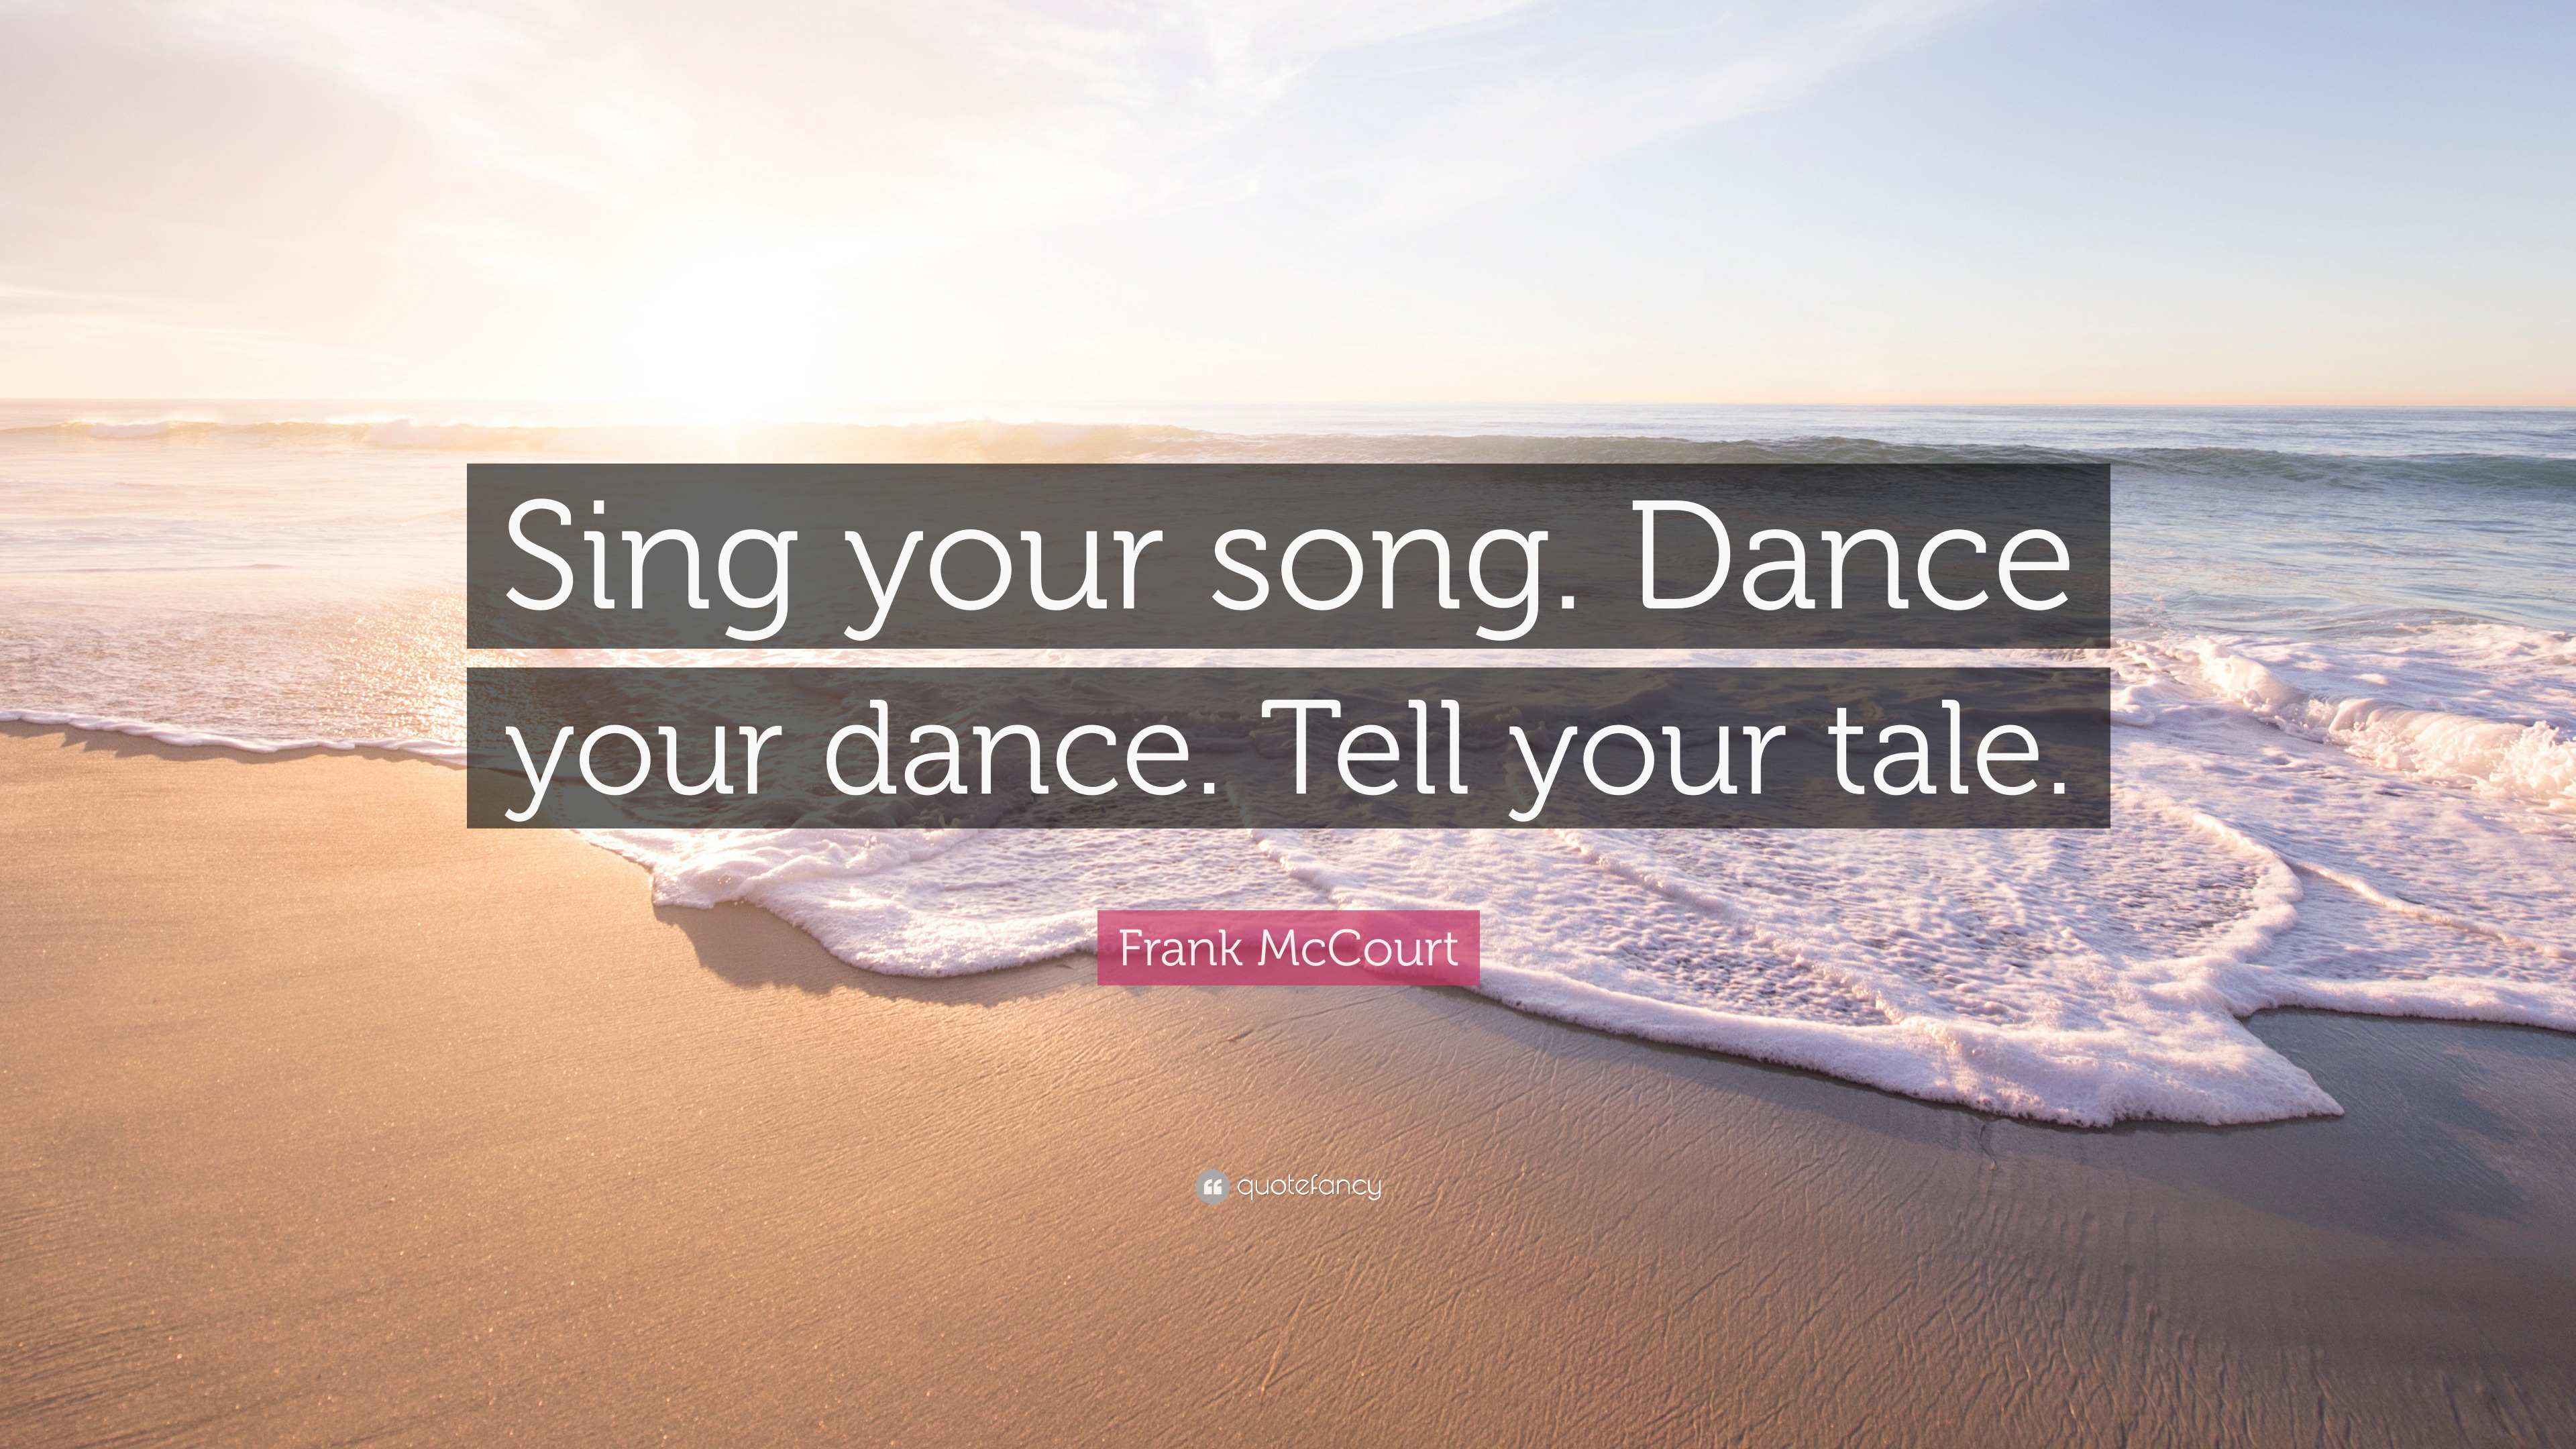 Frank McCourt Quote: “Sing your song. Dance your dance. Tell your tale.”